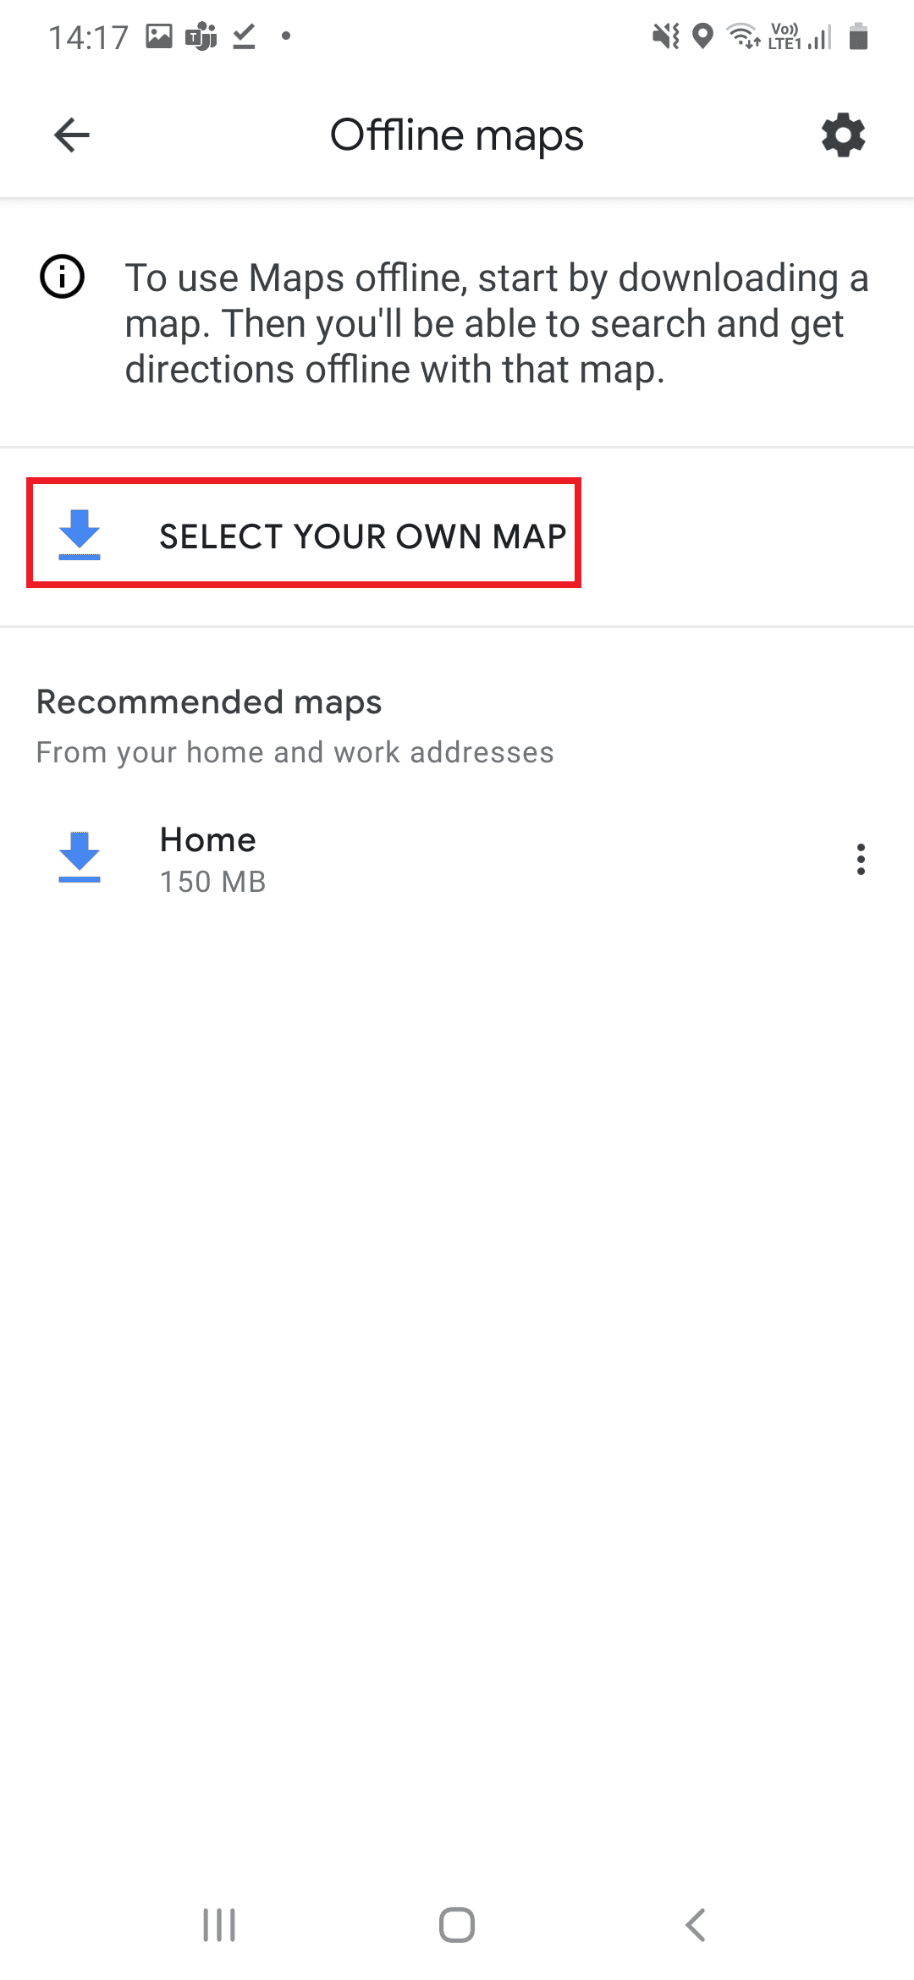 tap on SELECT YOUR OWN MAP